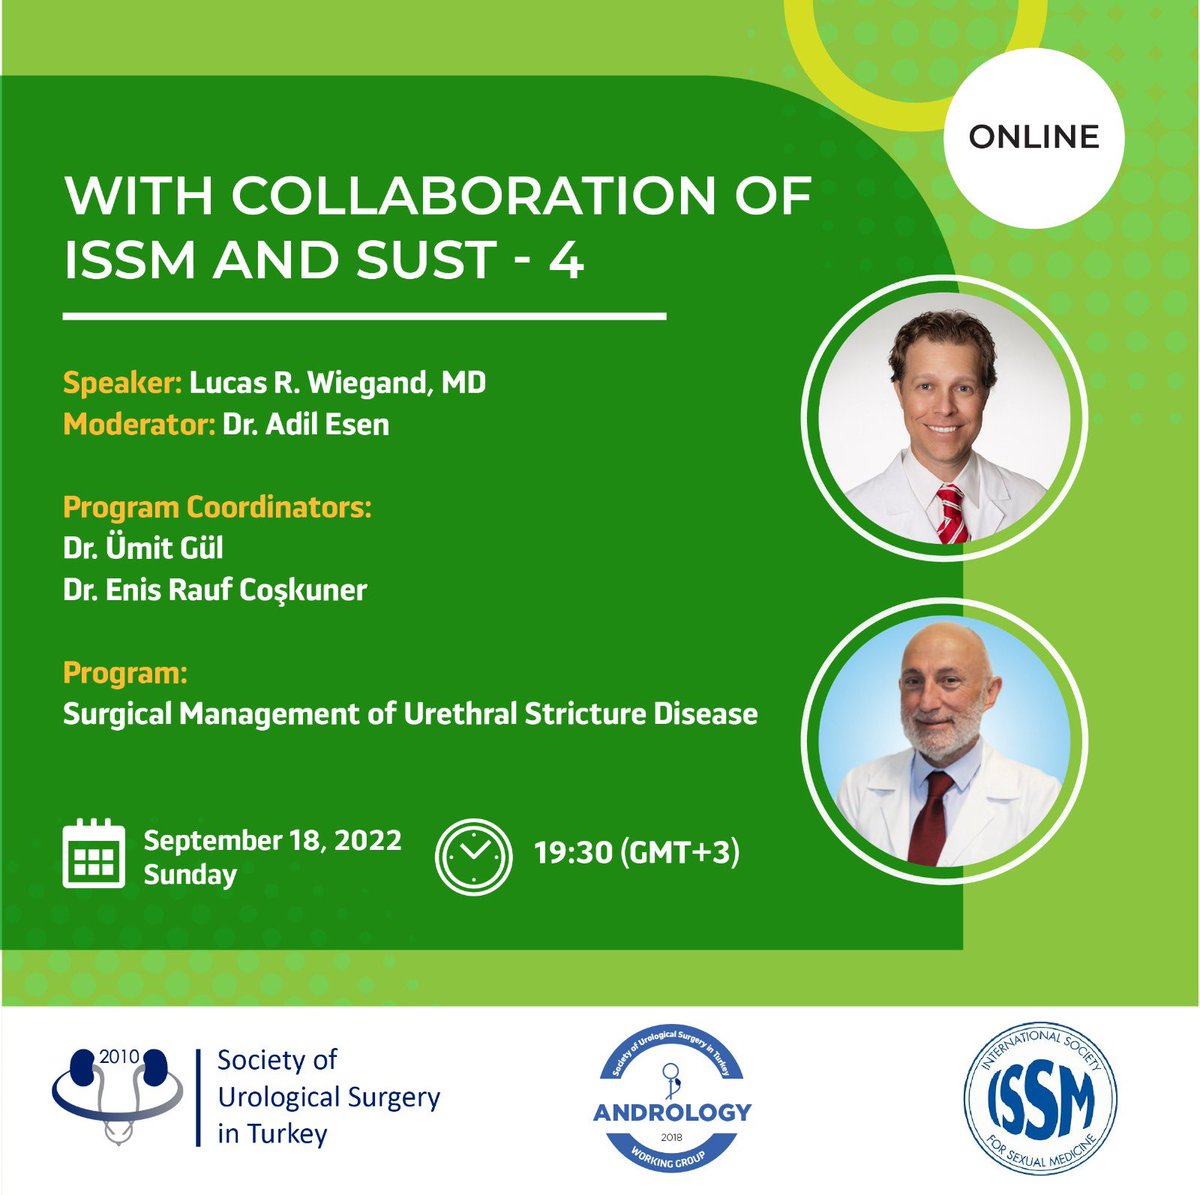 Thank you to @ISSM_INFO and Society of Urologic Surgery in Turkey - Andrology for the opportunity to discuss #urethralstricture surgical management. Good discussion!  @USFUrology